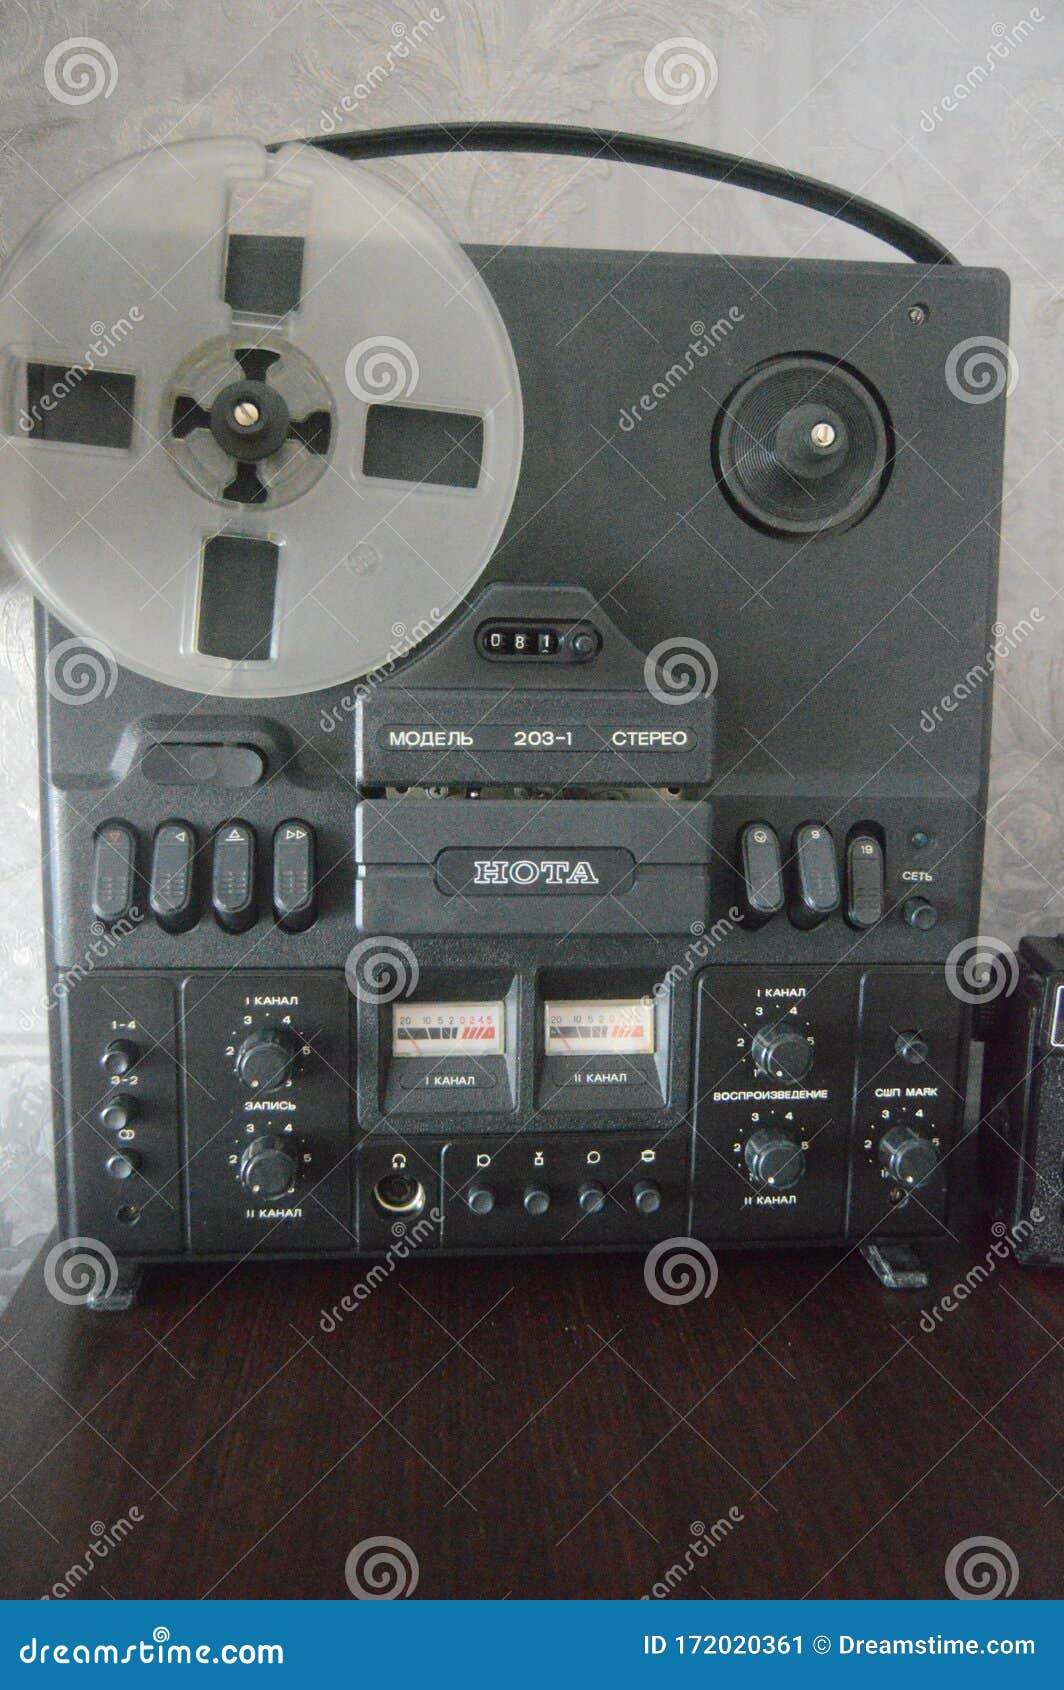 The Reel-to-reel Tape Recorder Nota 203-1 Stereo Editorial Photo